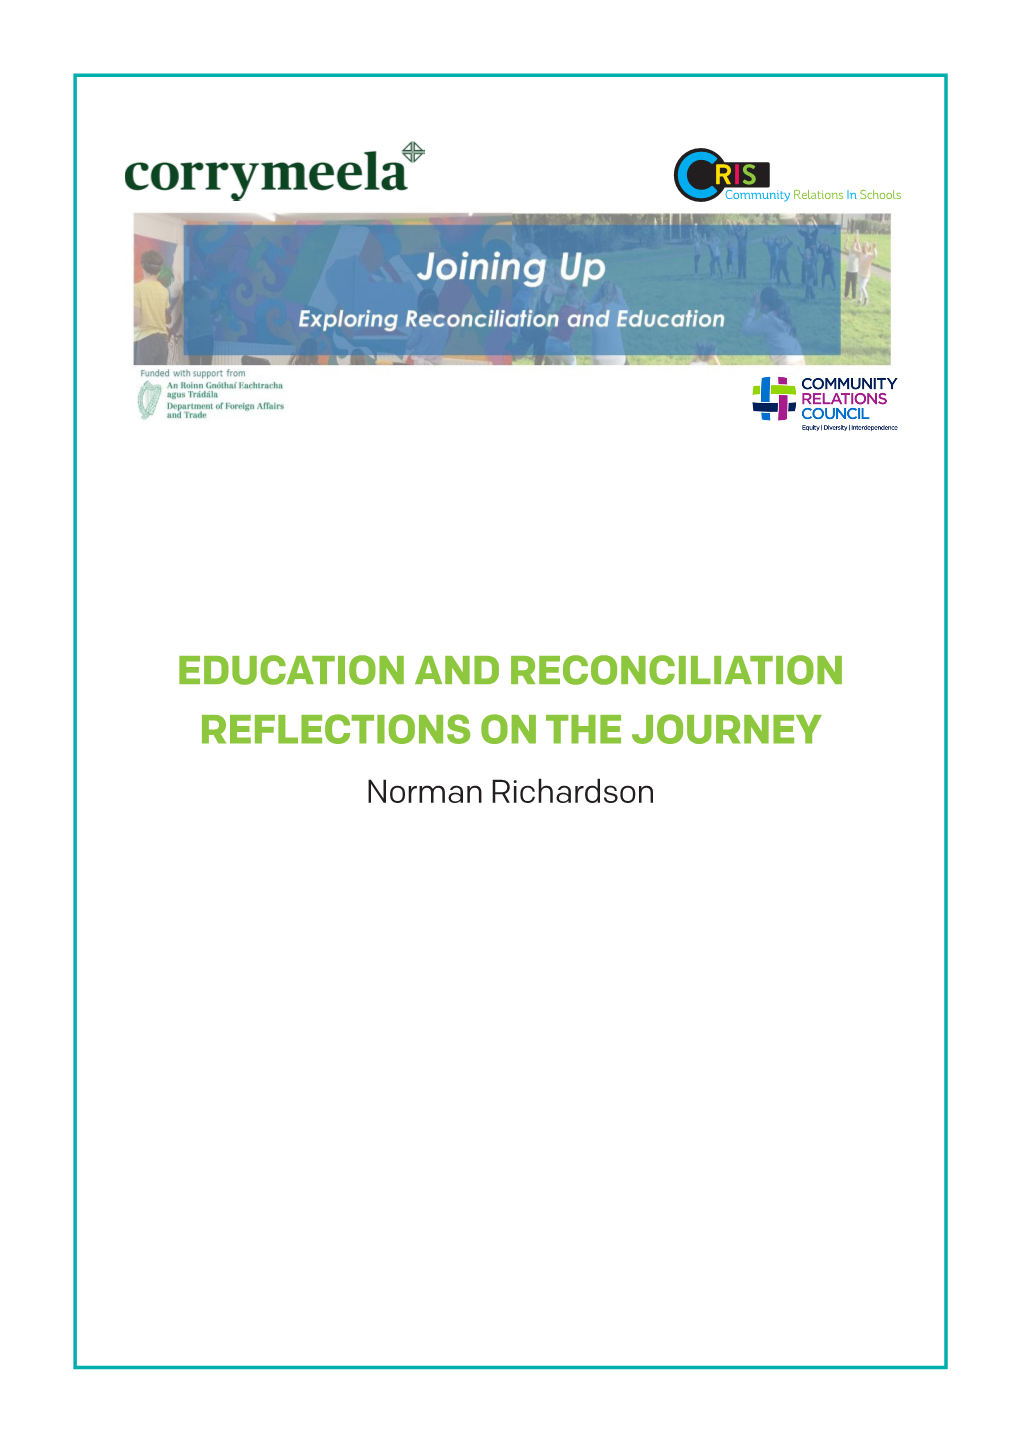 EDUCATION and RECONCILIATION REFLECTIONS on the JOURNEY Norman Richardson “Art of Everyday Peacebuilding” by Patrick Sanders